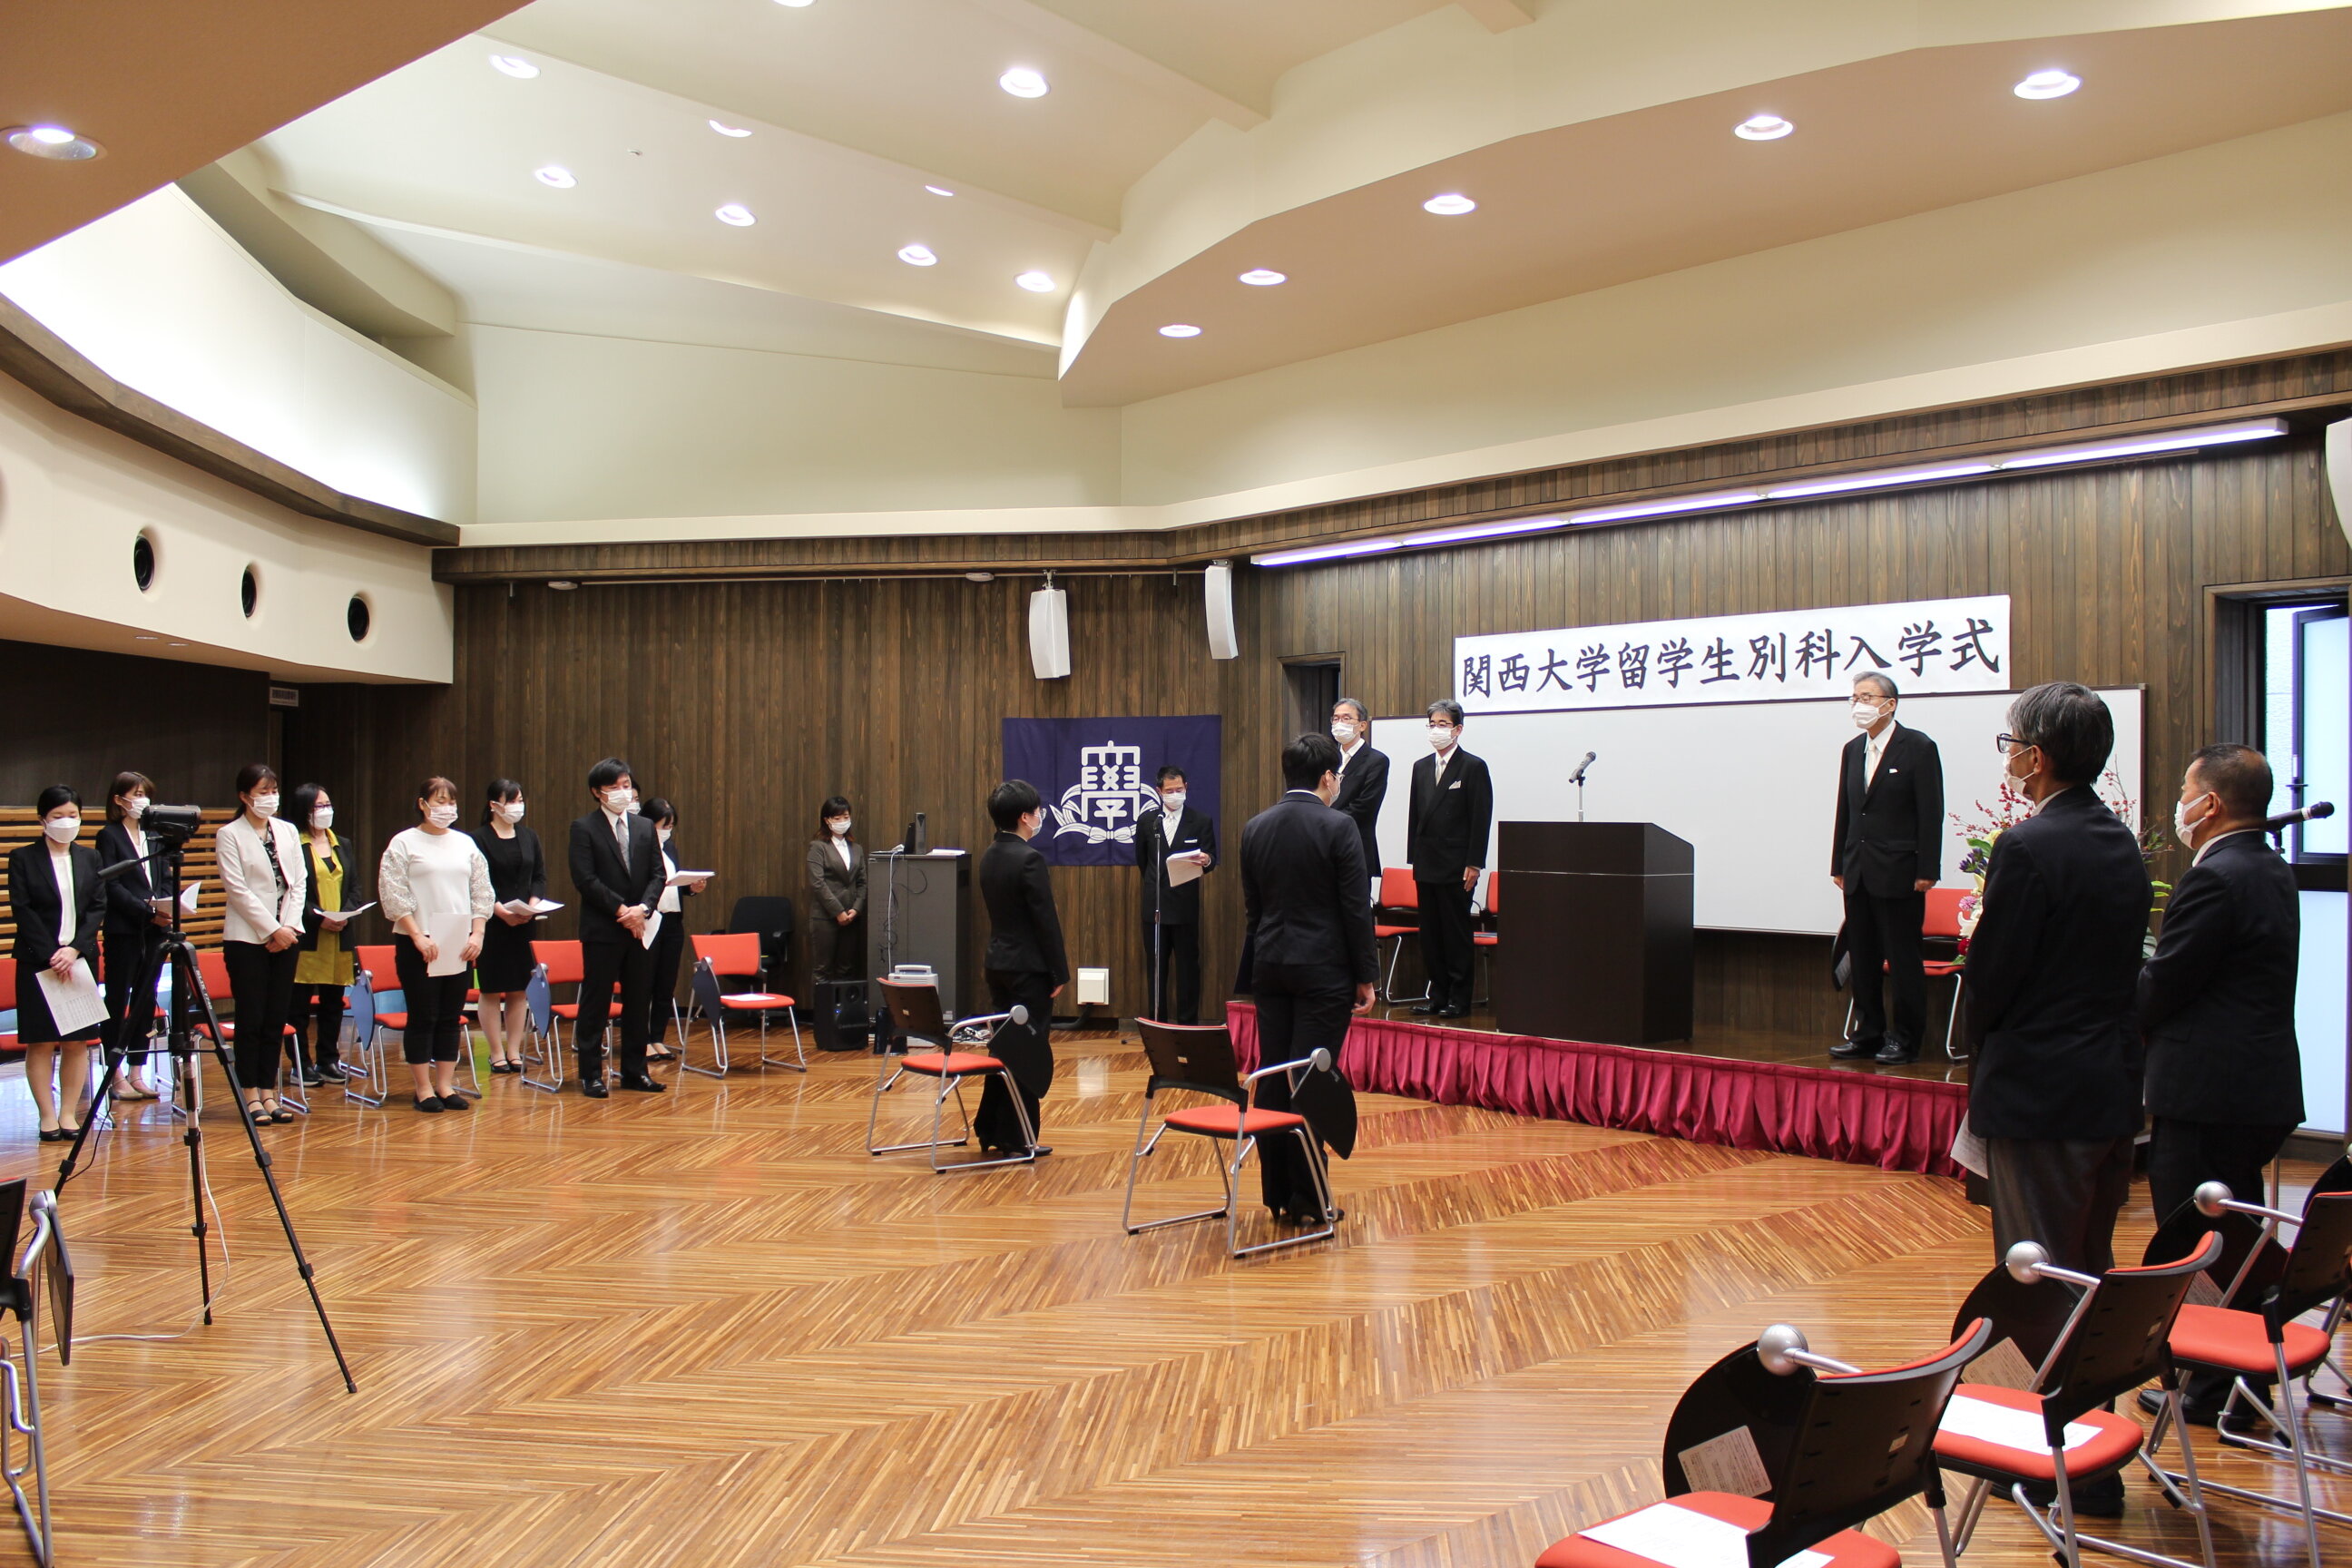 The 2021 Fall Entrance Ceremony was held 